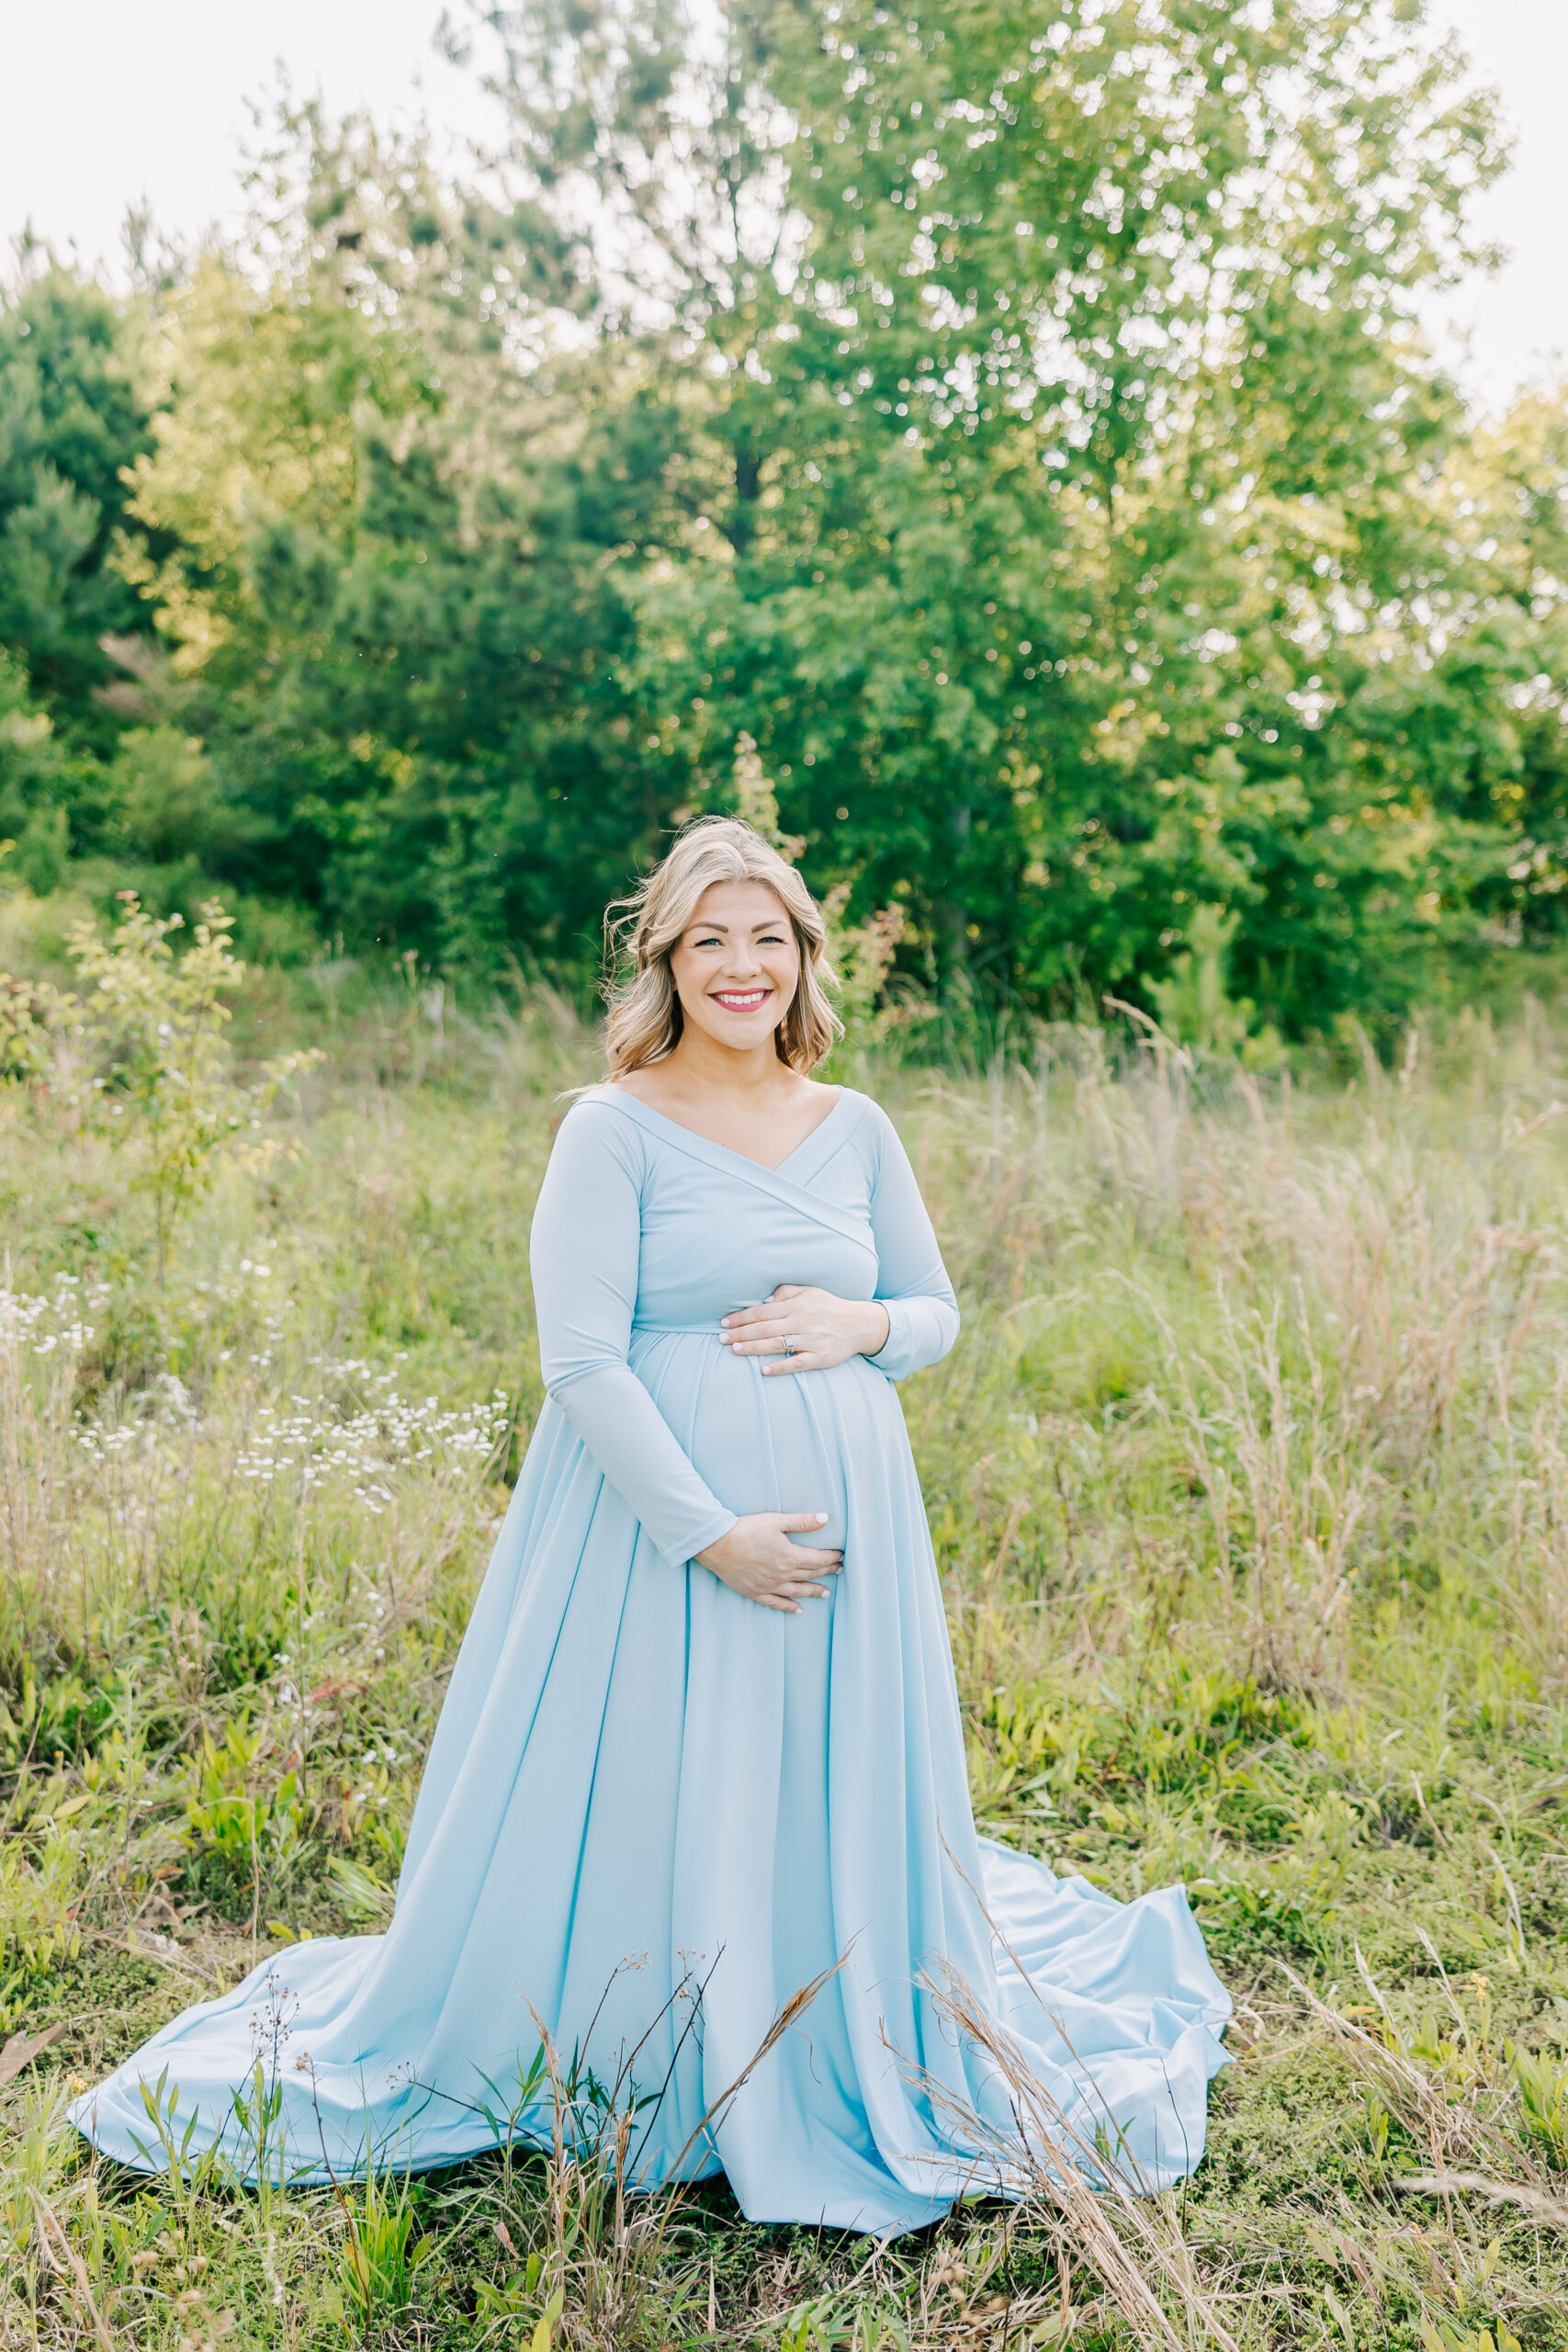 Expecting mom smiling holding her belly during her maternity session.